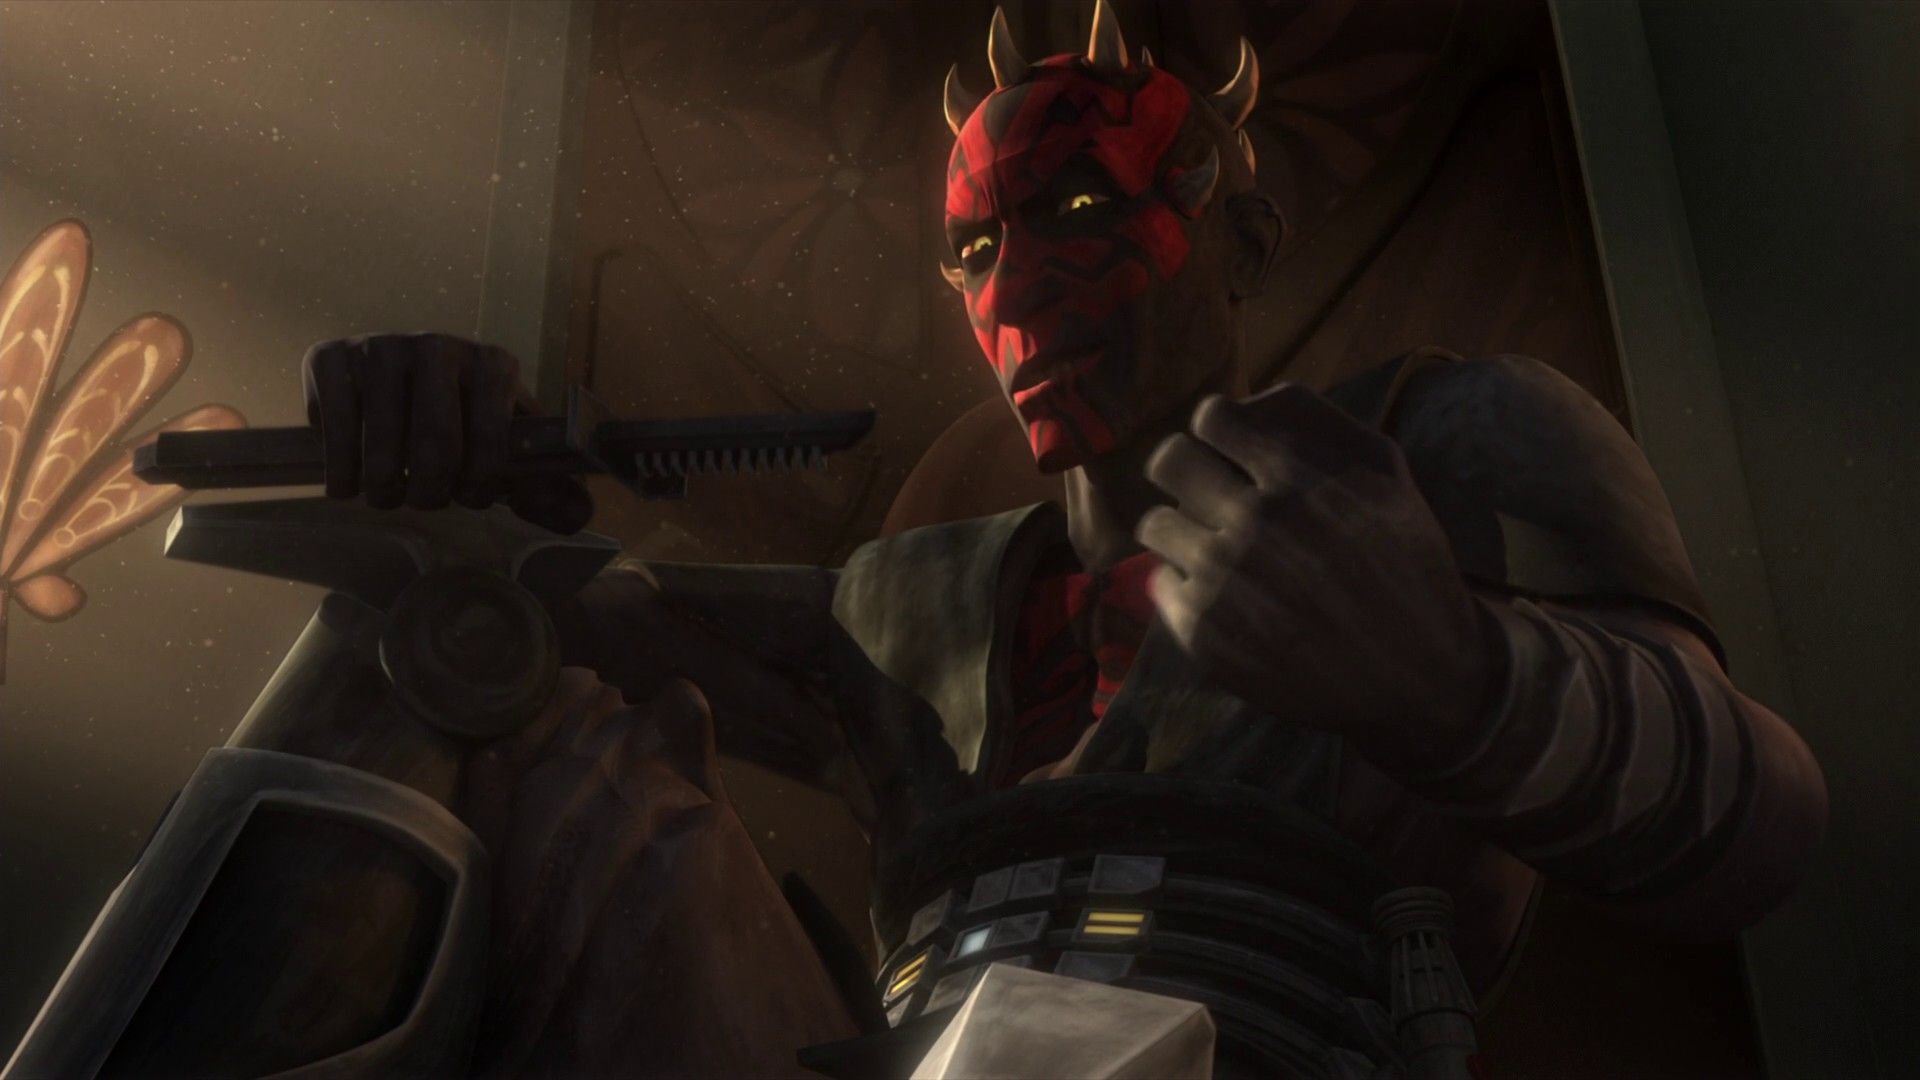 Darth Maul Wallpapers Clone Wars The Art Mad Wallpapers 1920x1080